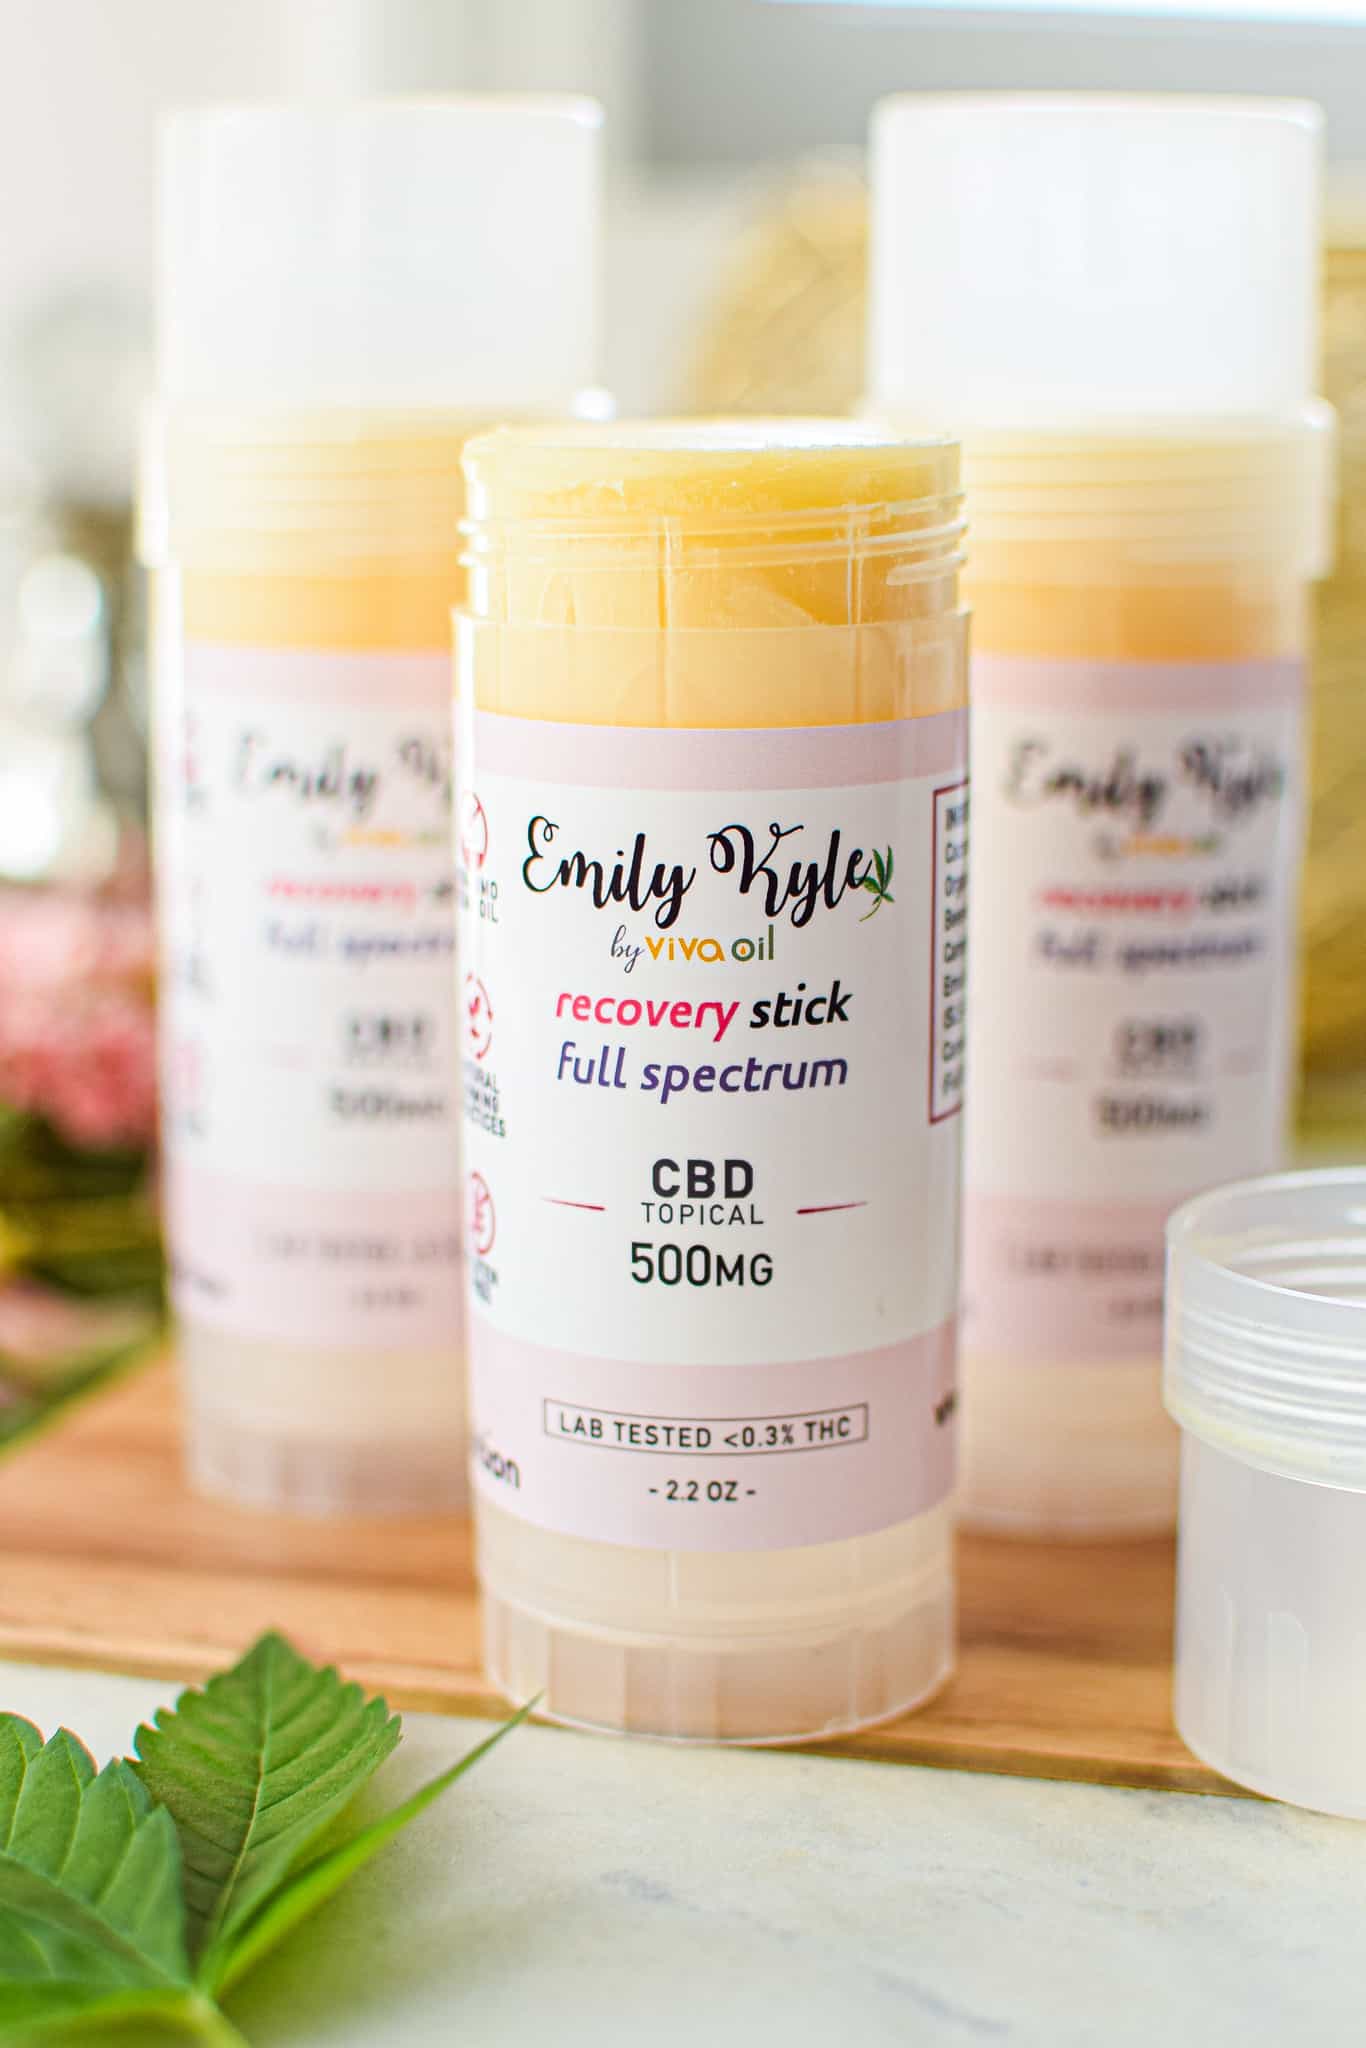 A picture of Emily Kyle's full-spectrum CBD recovery stick.